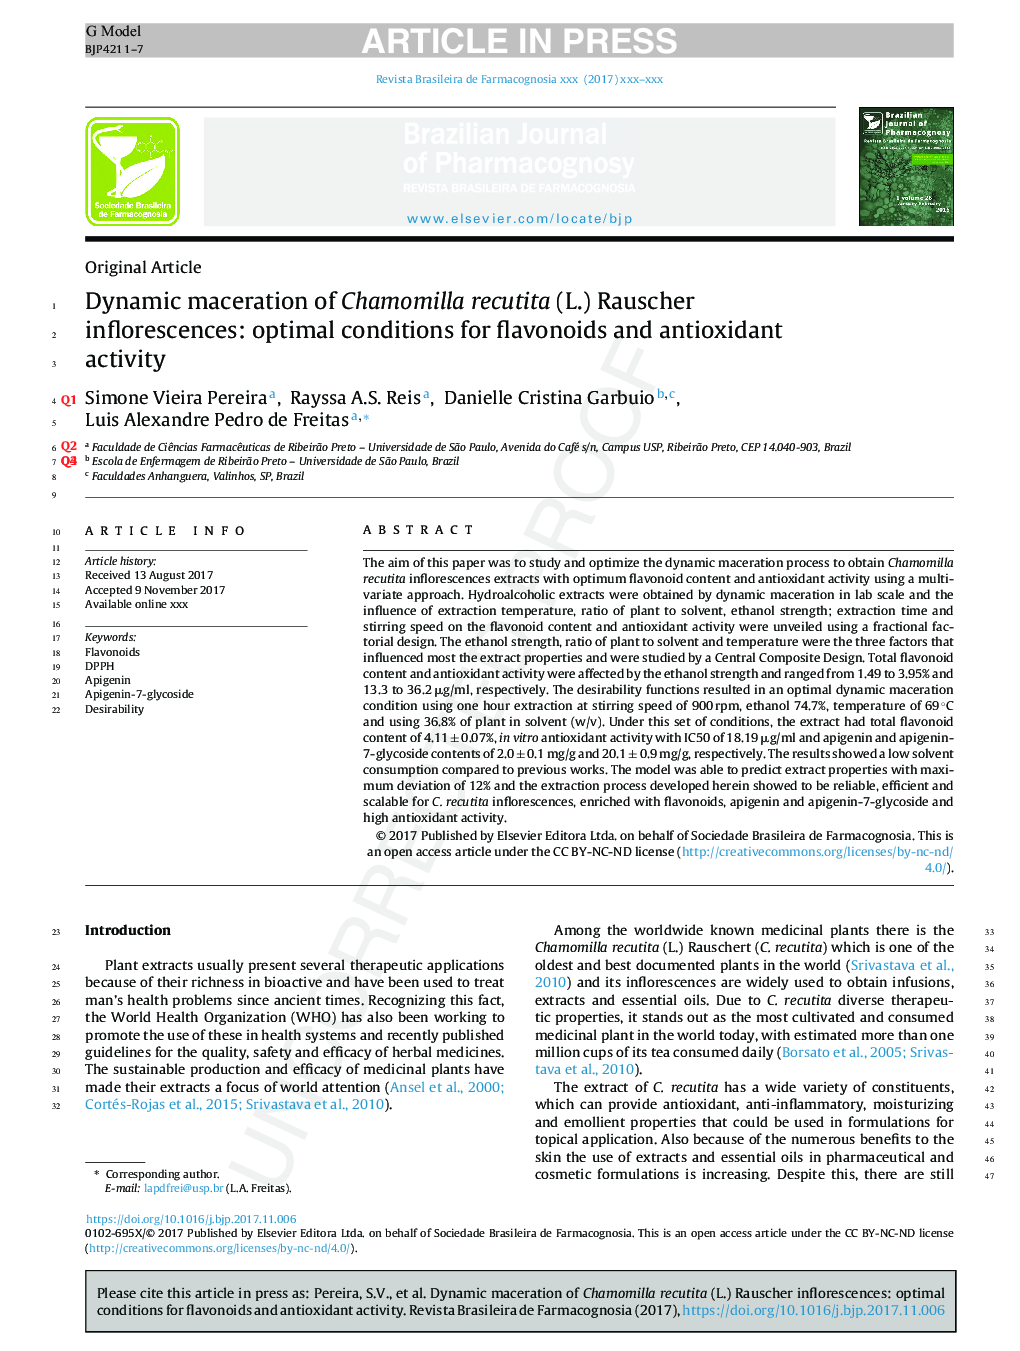 Dynamic maceration of Matricaria chamomilla inflorescences: optimal conditions for flavonoids and antioxidant activity